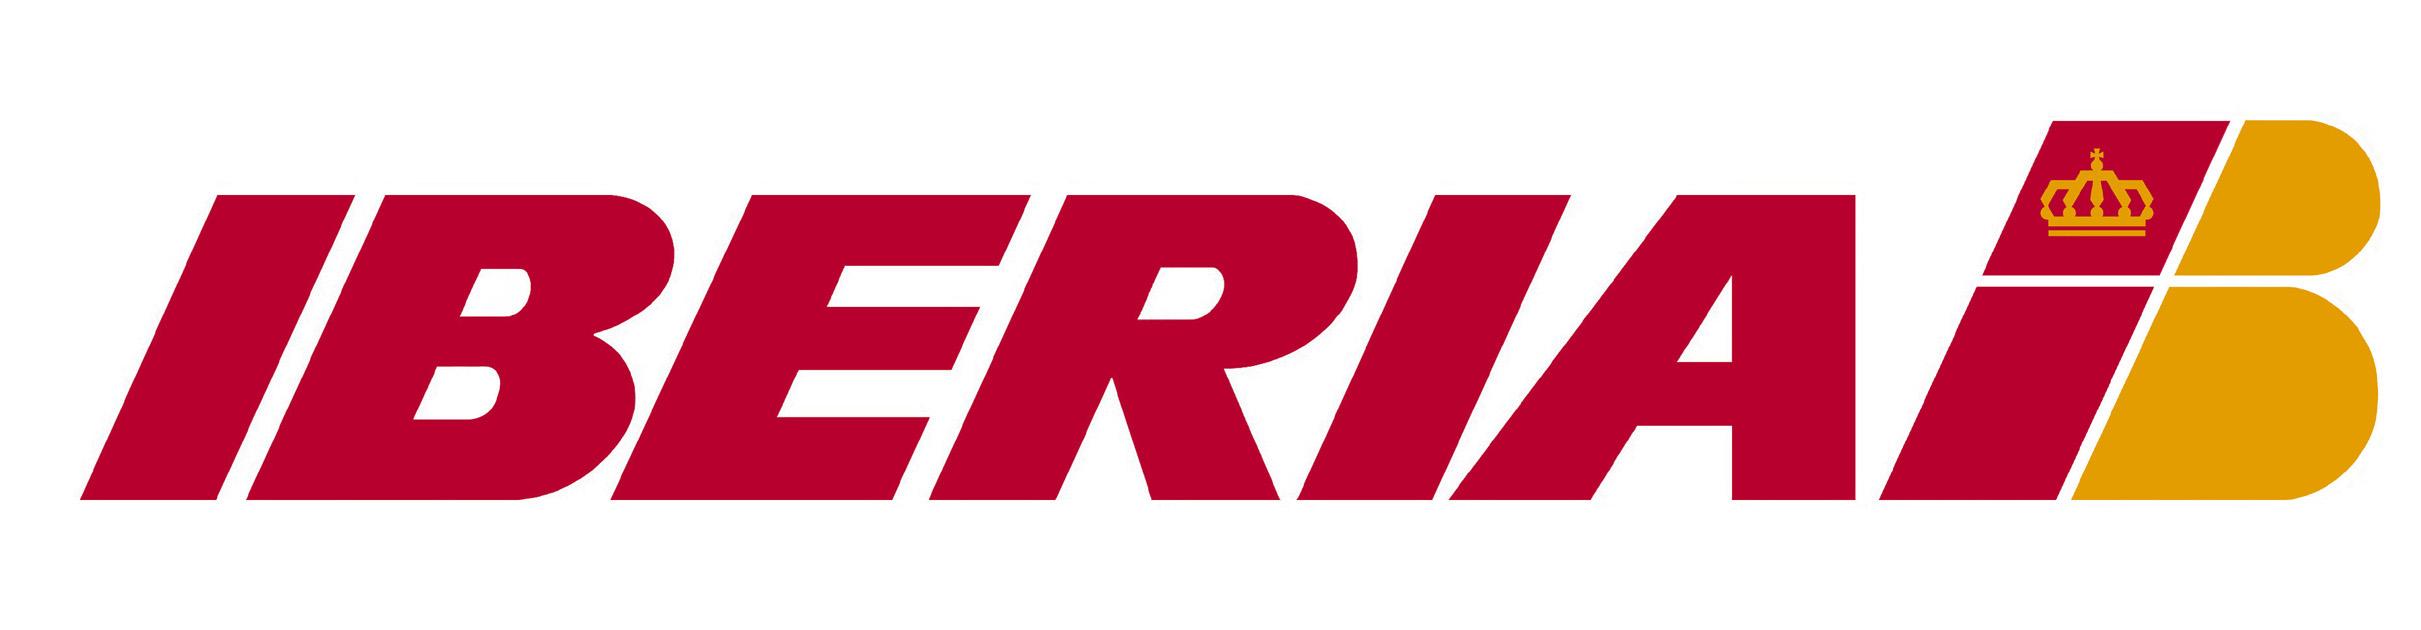 Iberia Logo - Iberia's new logo...drops the Spanish Crown! - Points to be Made